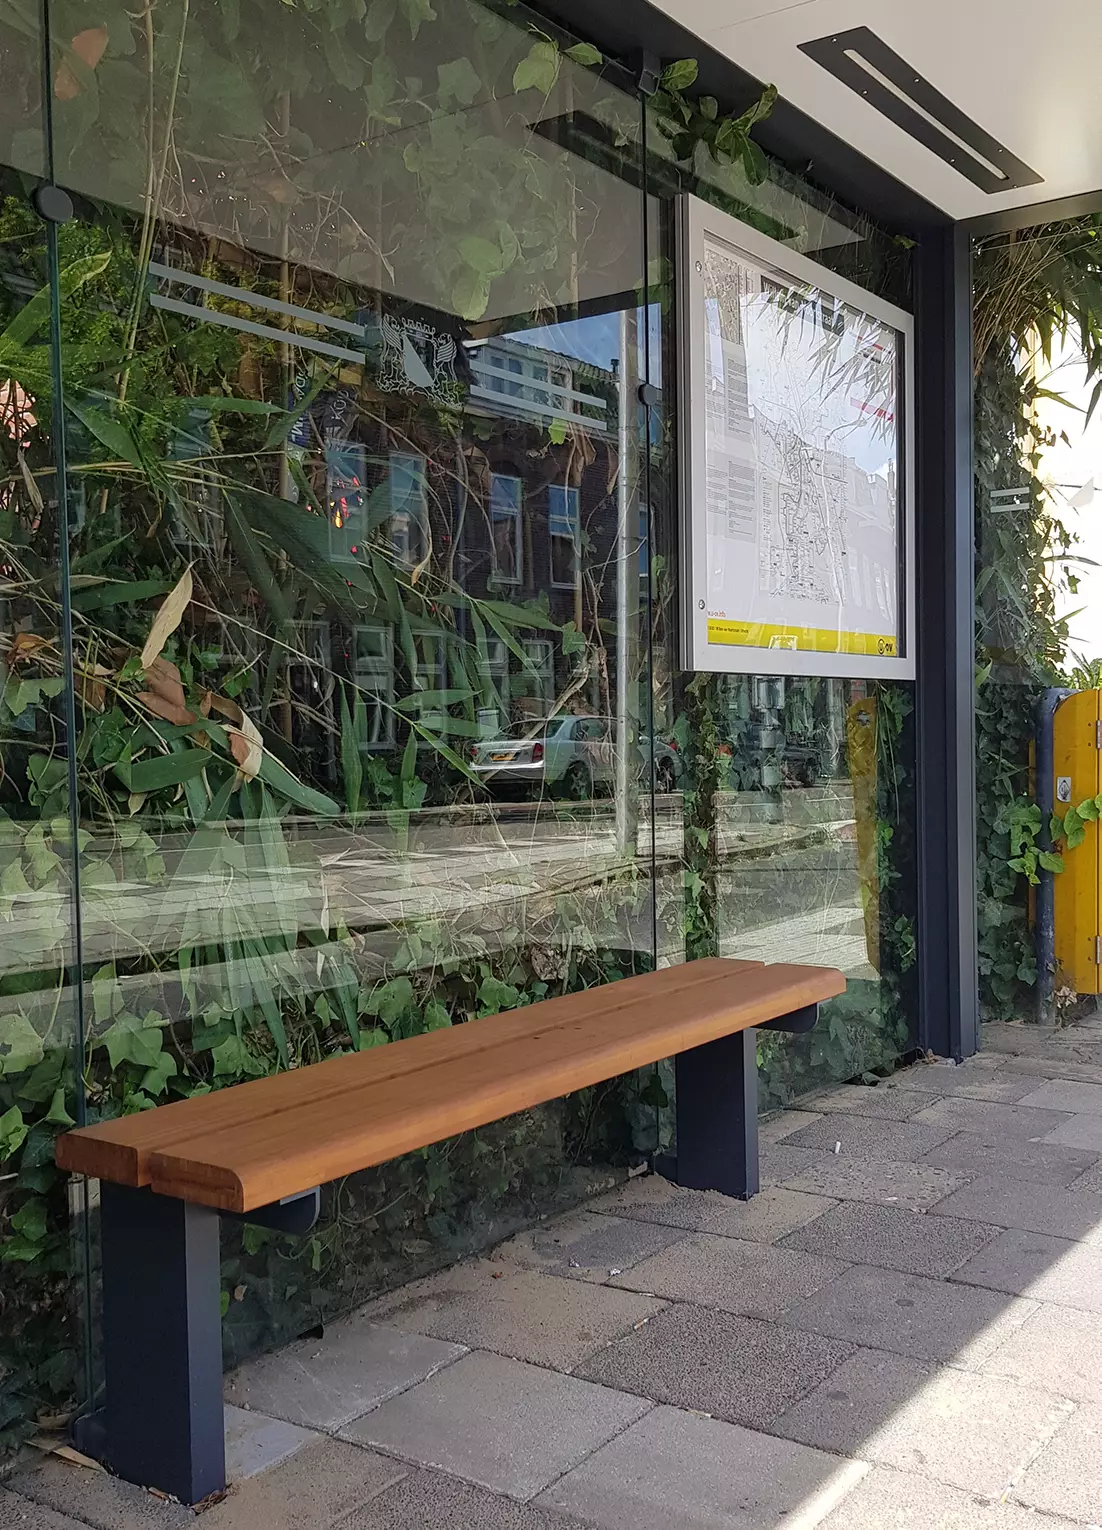 The bus shelters have bamboo benches and solar-powered lighting